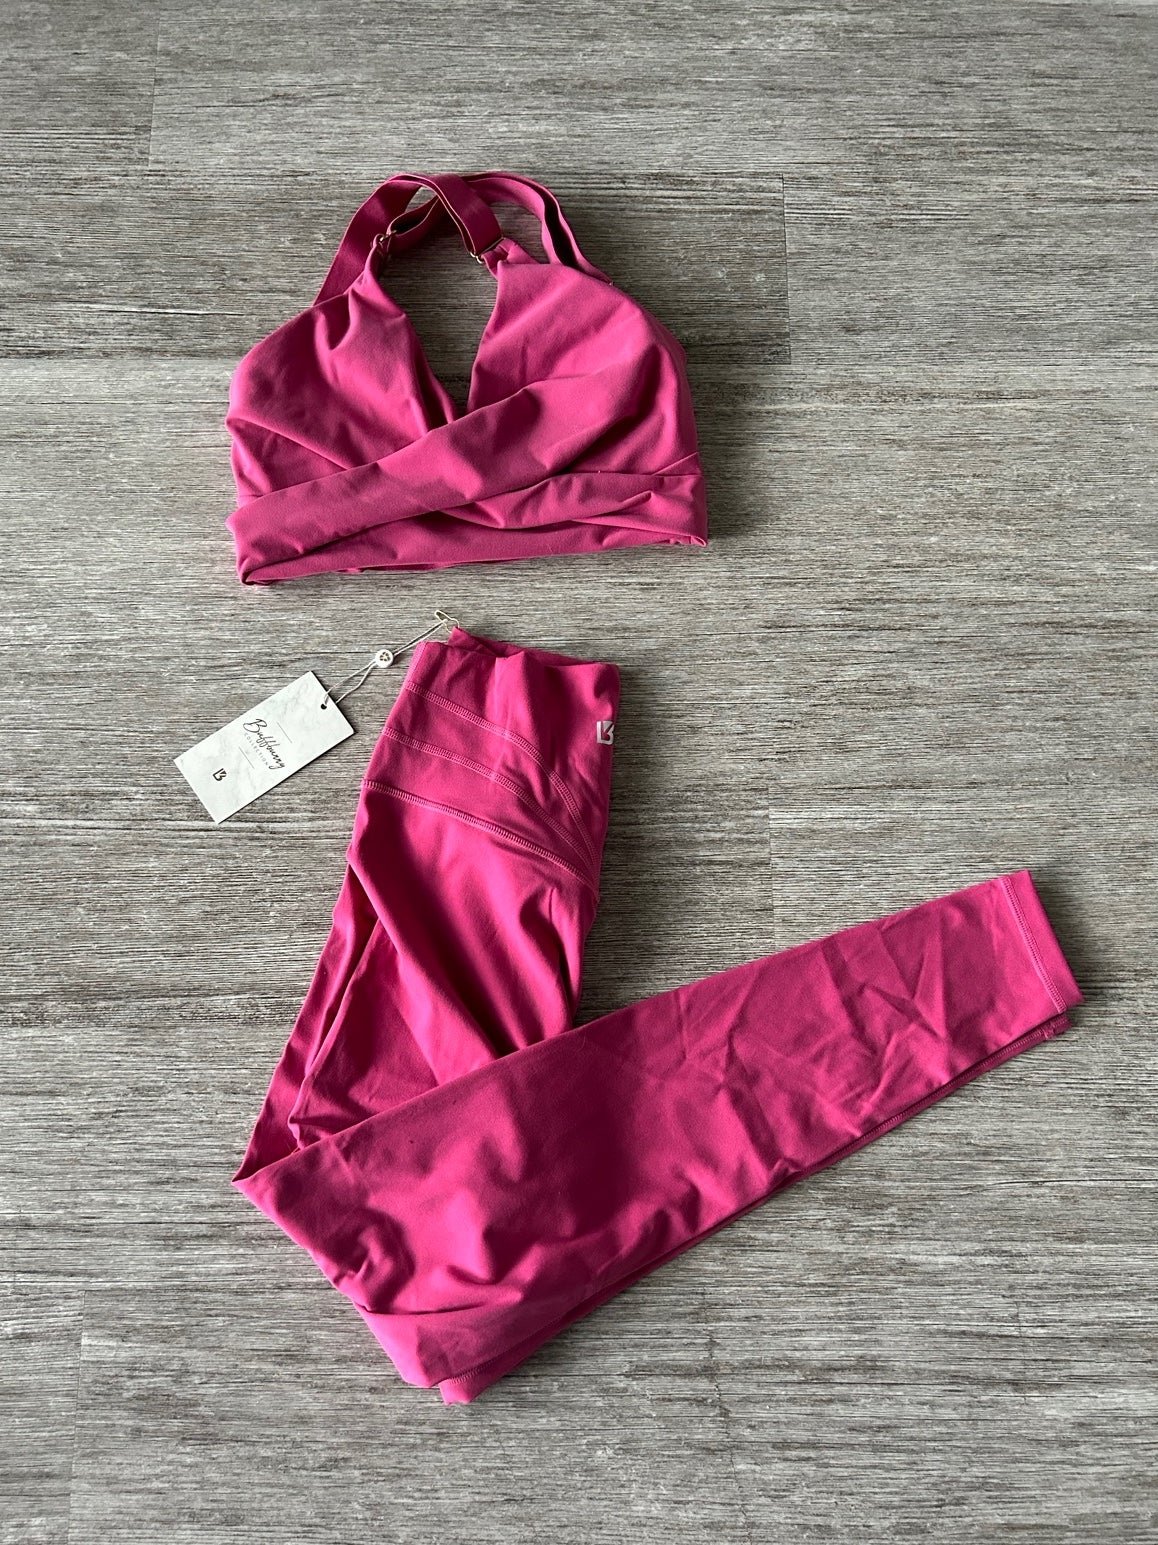 Affordable Buffbunny set nOQMVAdMC Outlet Store